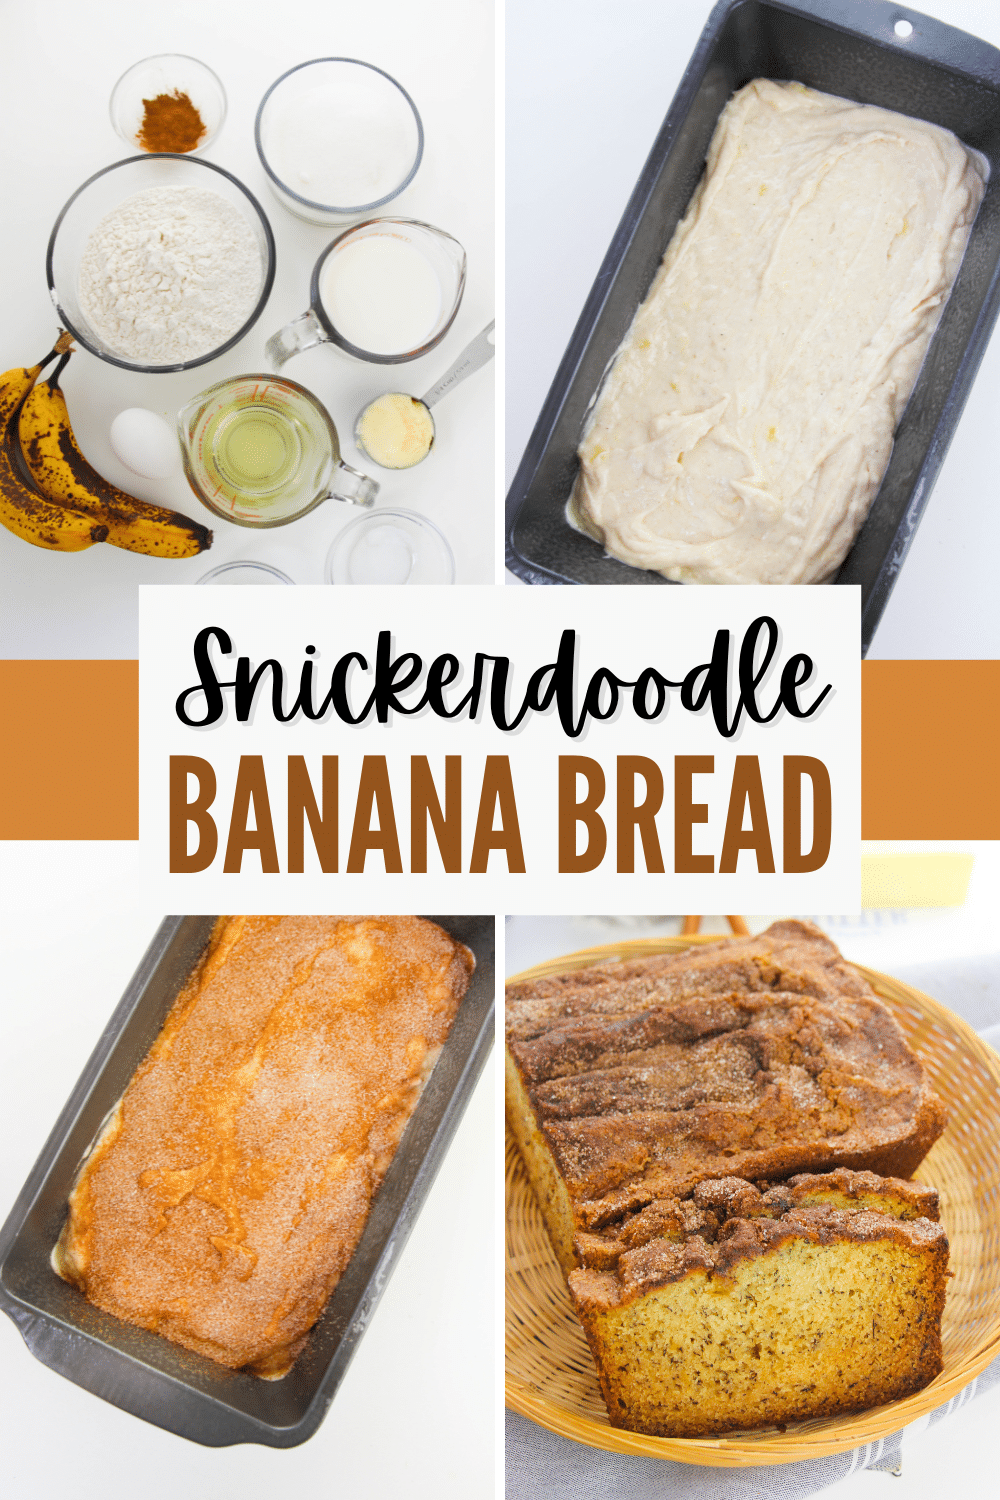 Snickerdoodle Banana Bread is the perfect fusion of moist banana bread and the timeless delight of snickerdoodle cookies in each bite. #snickerdoodlebananabread #snickerdoodles #bananabreadrecipes #classicbananabread #snickerdoodlecookies via @wondermomwannab